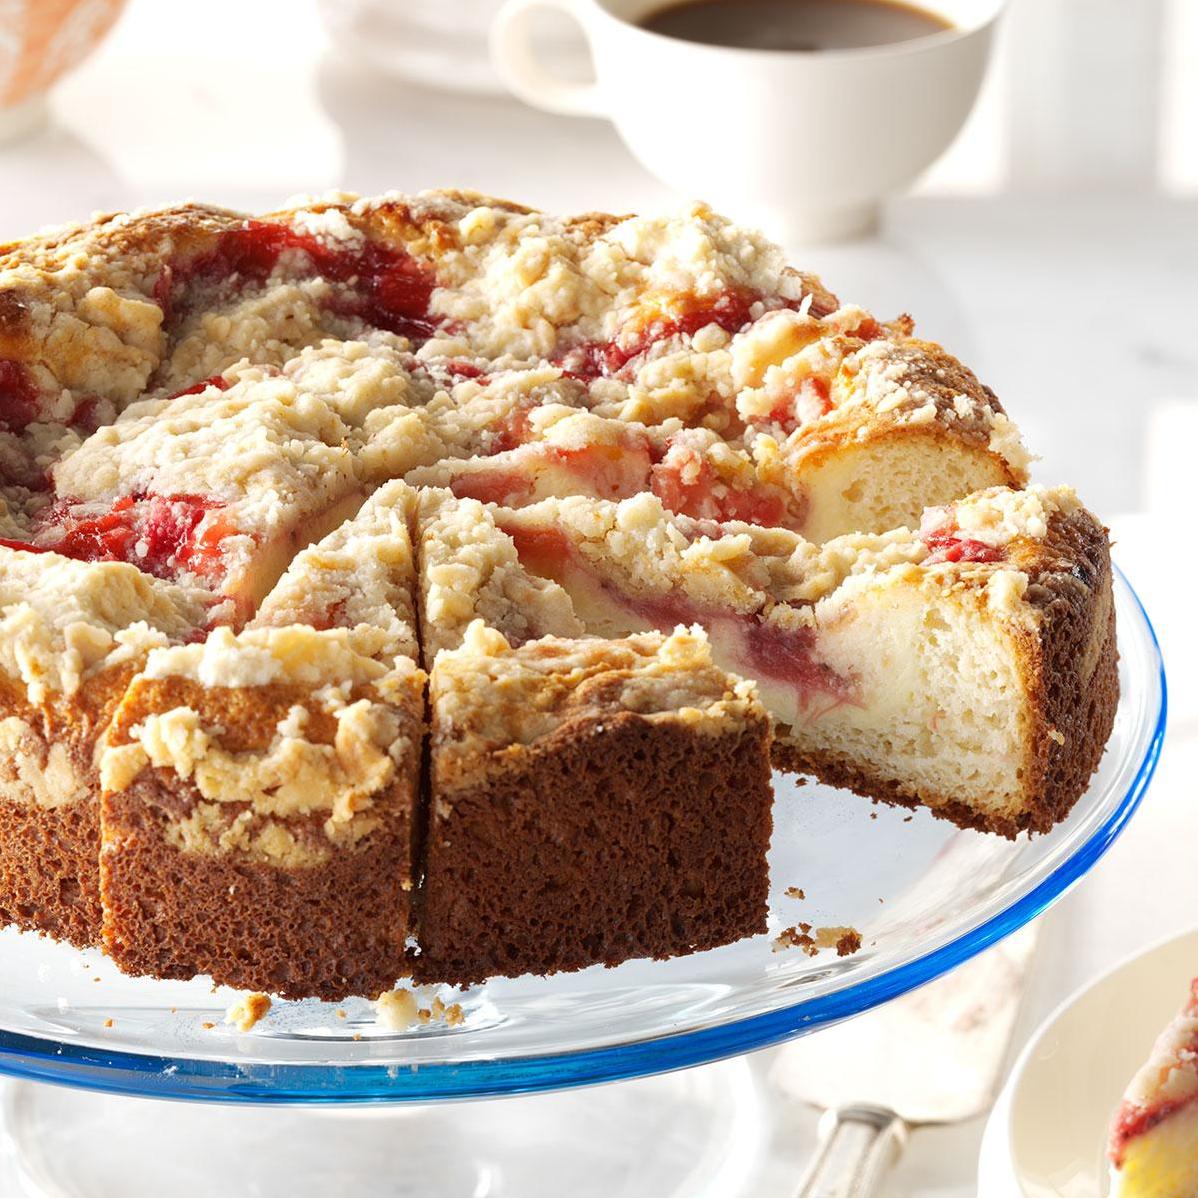  A slice of heaven with every bite of this Rhubarb and Berry Coffee Cake.